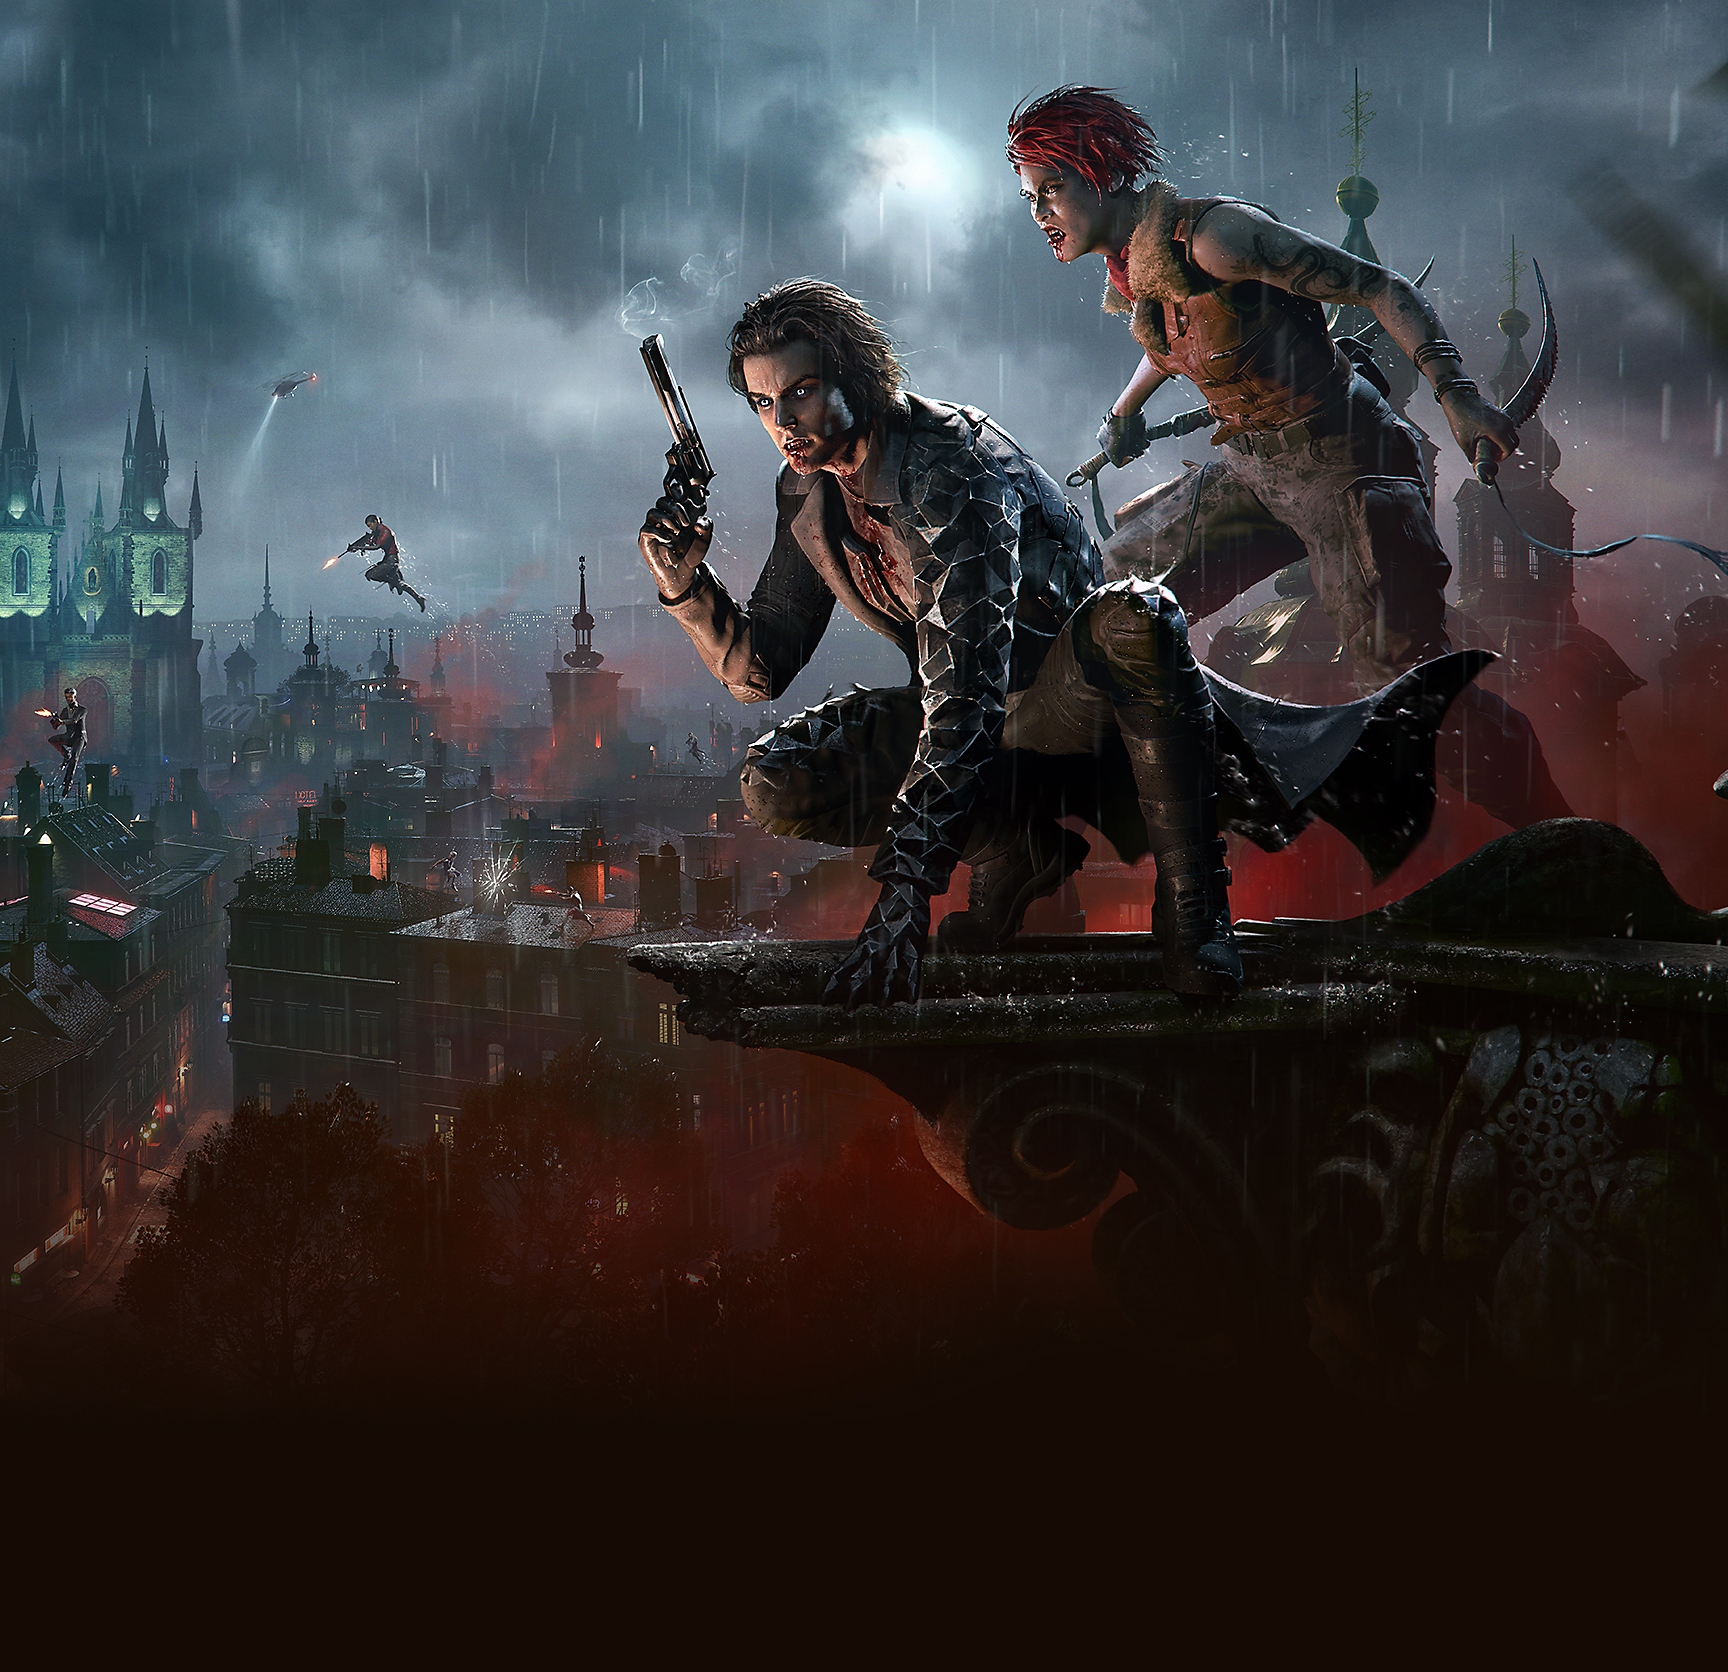 Vampire the Masquerade - Bloodhunt hero artwork showing two vampires sitting on a rooftop